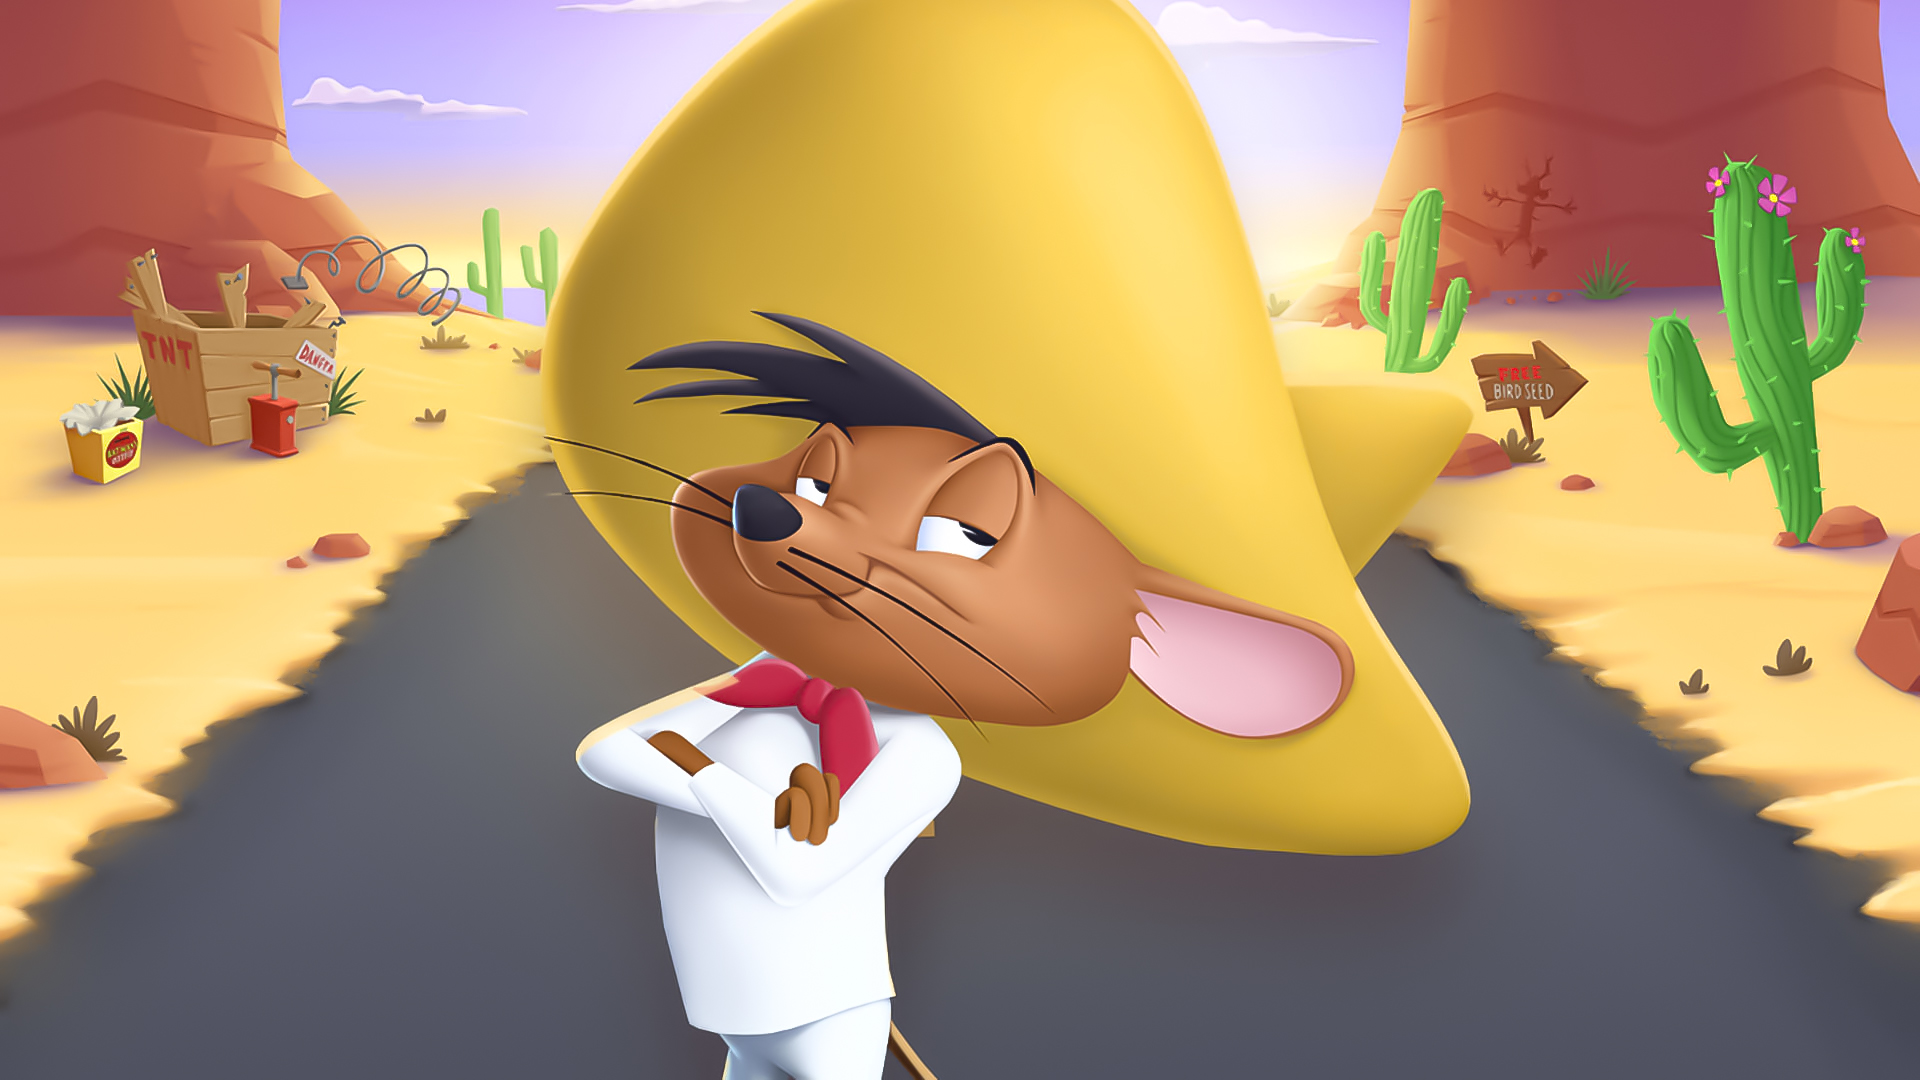 Speedy Gonzales Images - LaunchBox Games Database